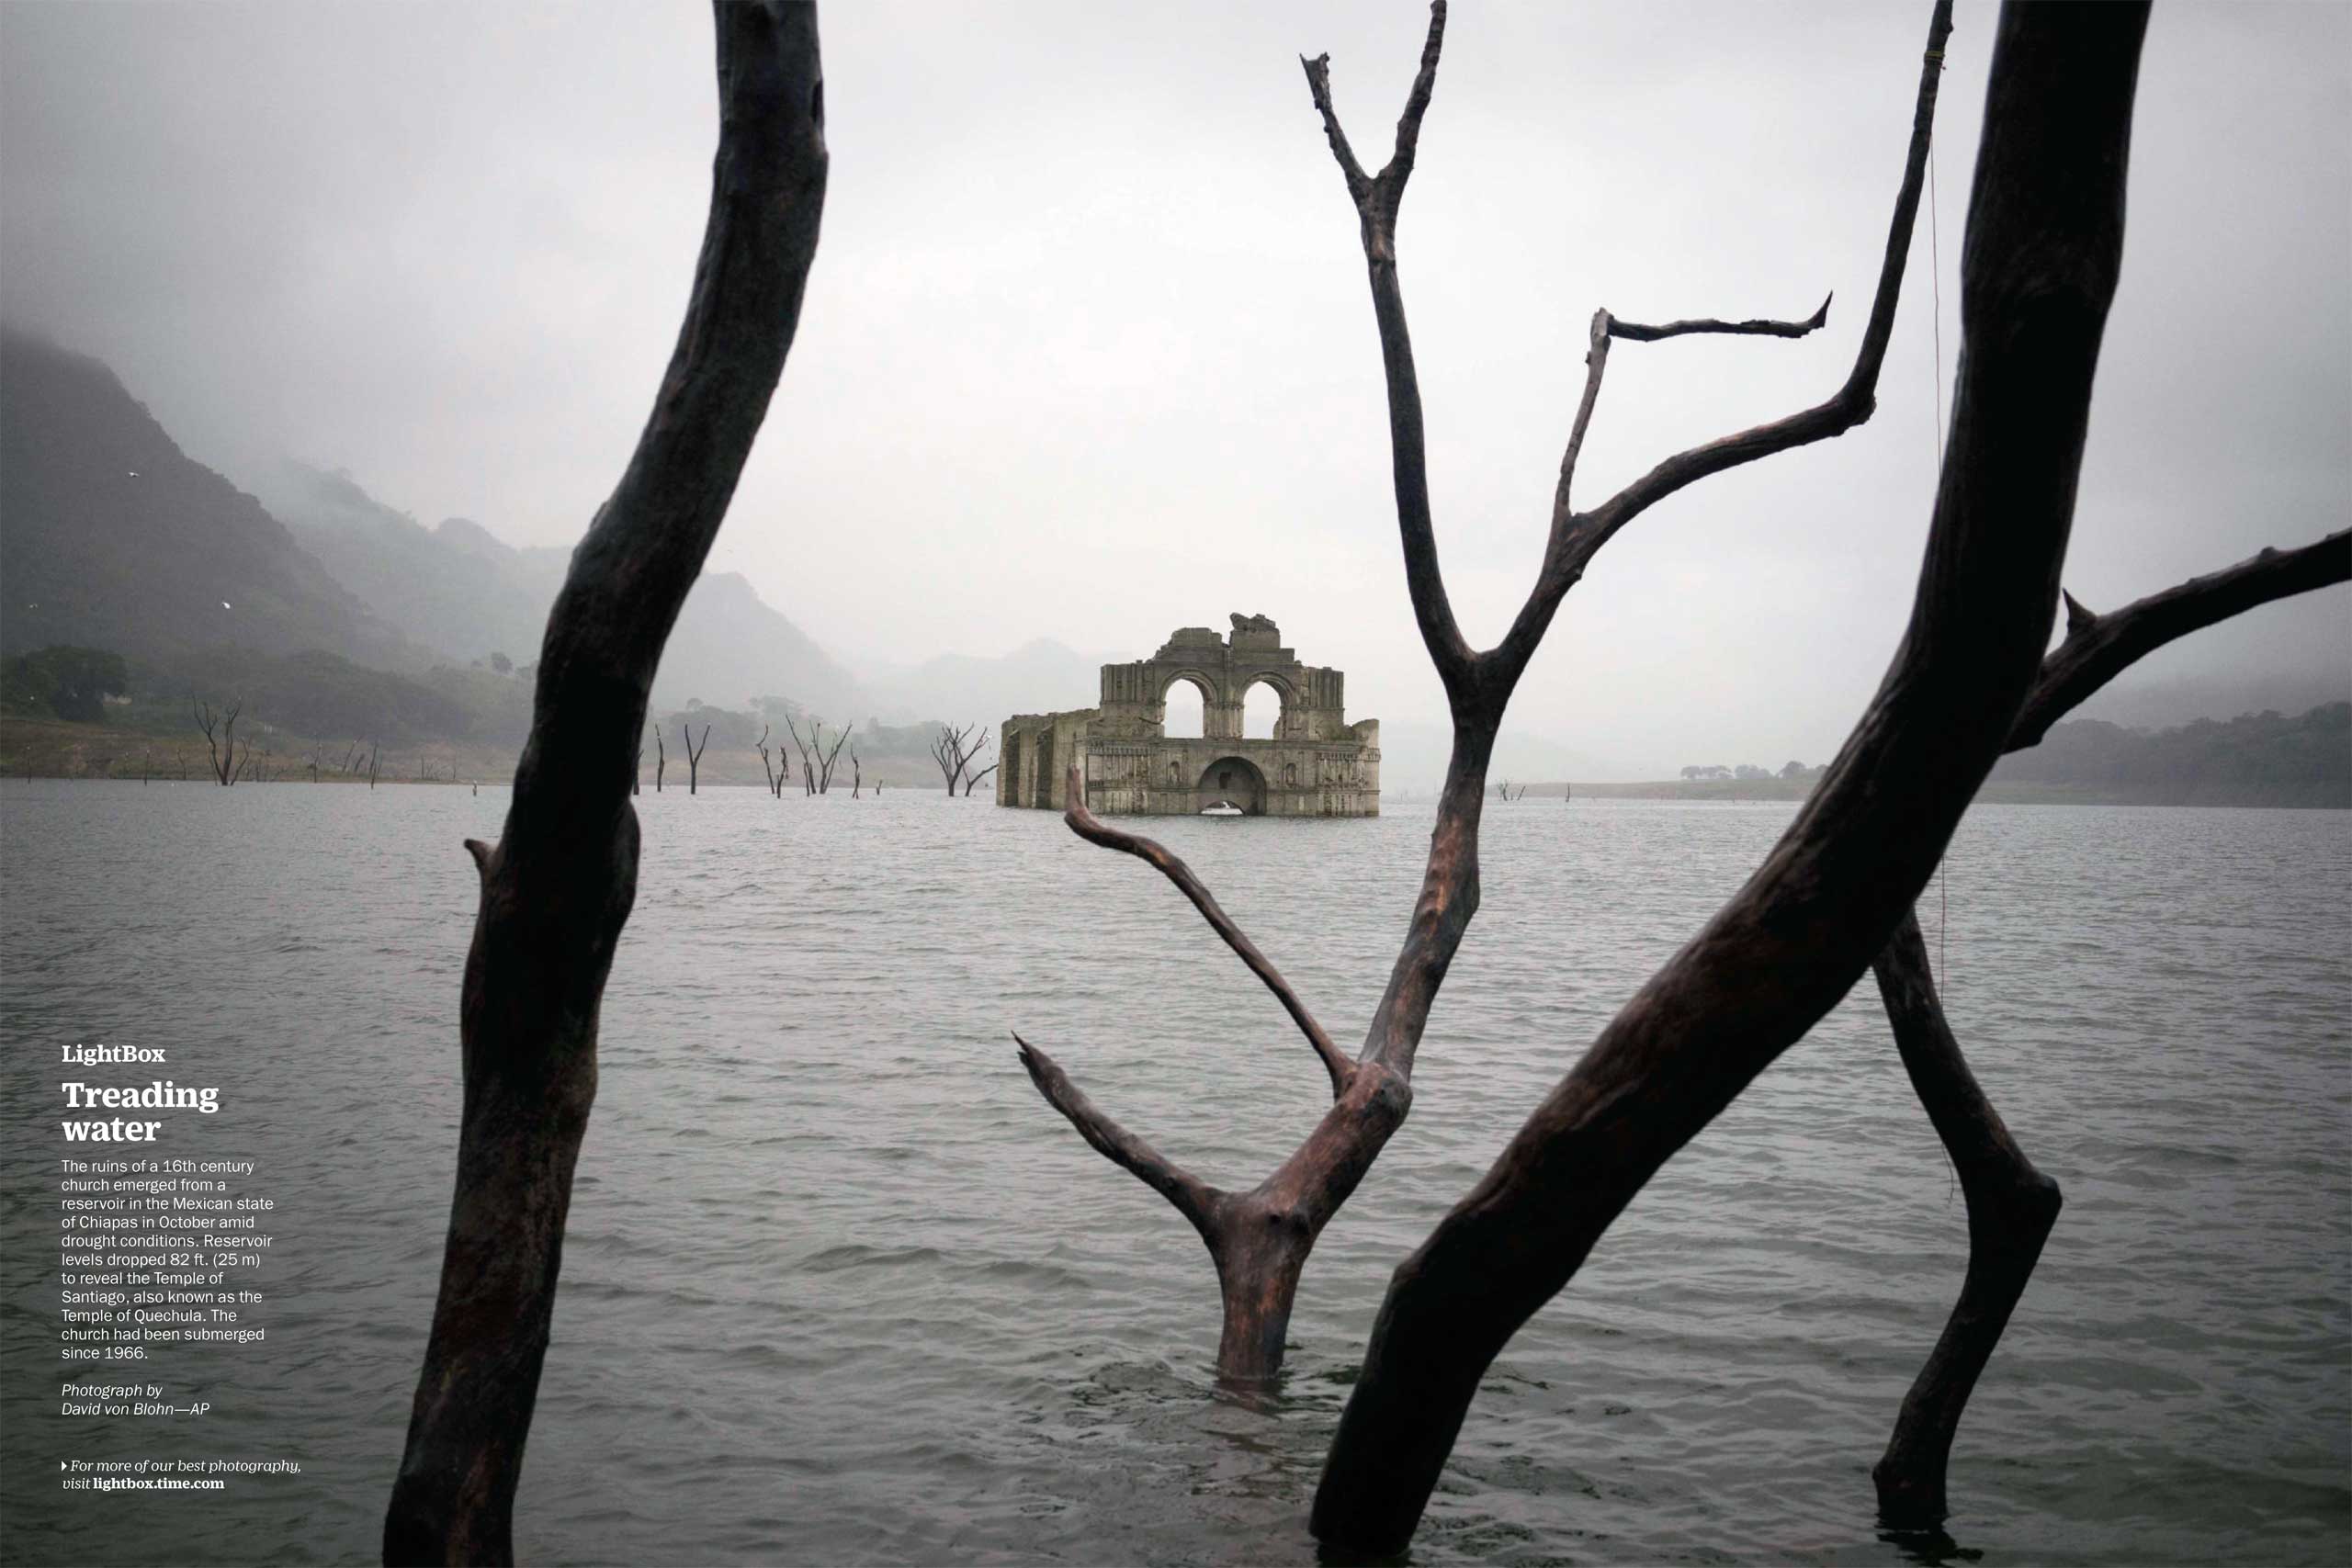 Photograph by David von Blohn—APThe ruins of a 16th century church emerged from a reservoir in the Mexican state of Chiapas in October amid drought conditions. Reservoir levels dropped 82 ft. (25 m) to reveal the Temple of Santiago, also known as the Temple of Quechula. The church had been submerged since 1966. (TIME issue November 2, 2015)